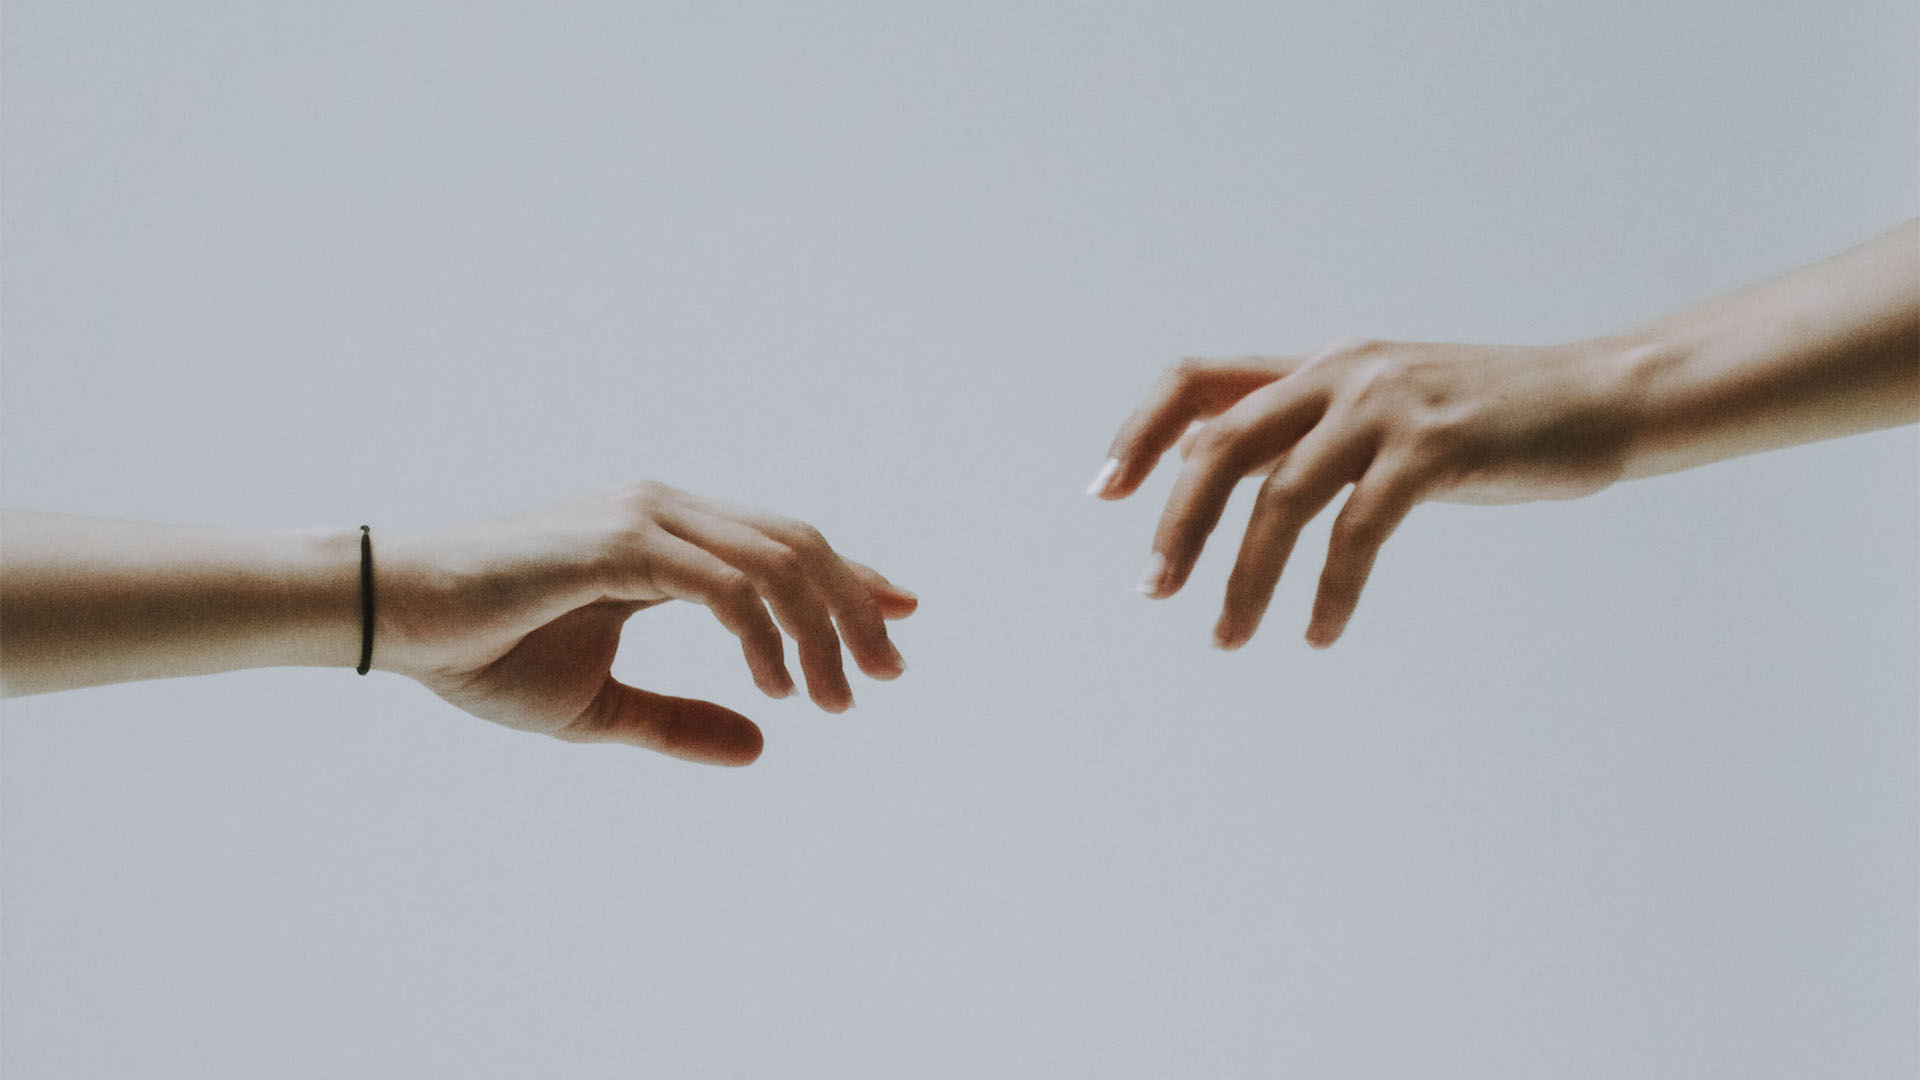 Two hands reaching out for each other.